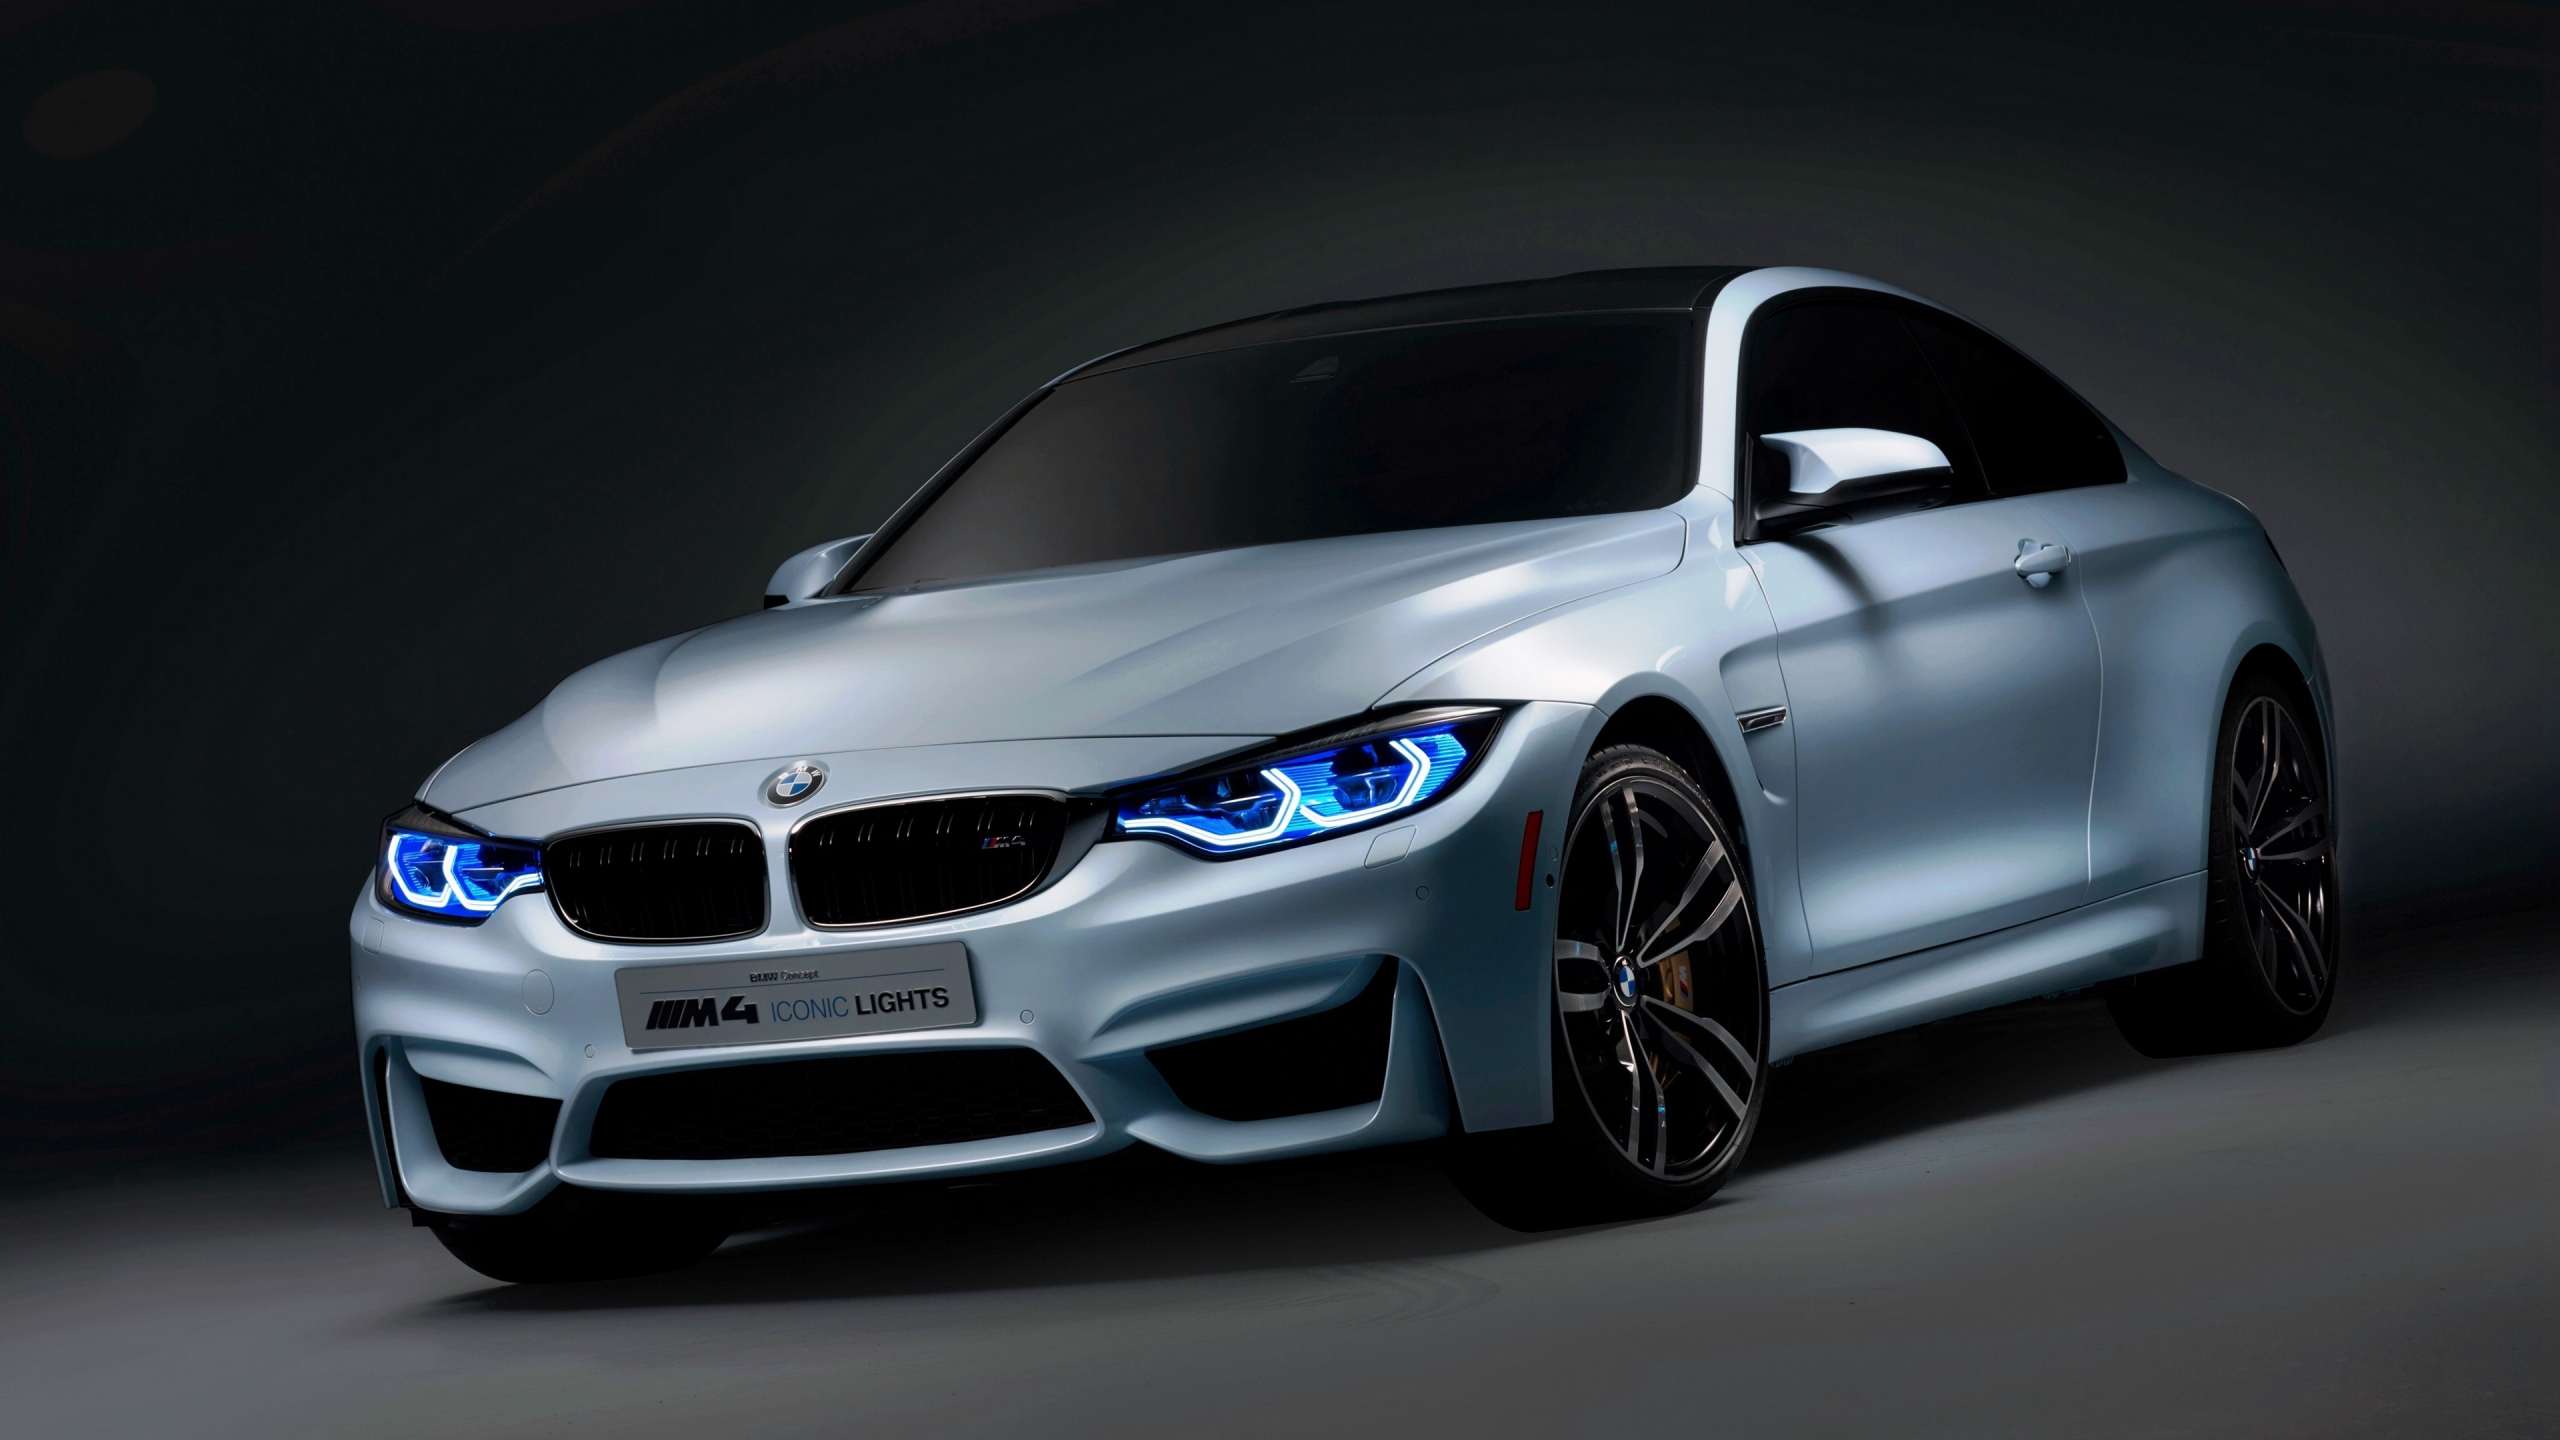 Download 2560x1440 Wallpaper Bmw M4 Iconic Lights Front Luxurious Sedan Dual Wide Widescreen 16 9 Widescreen 2560x1440 Hd Image Background 7210